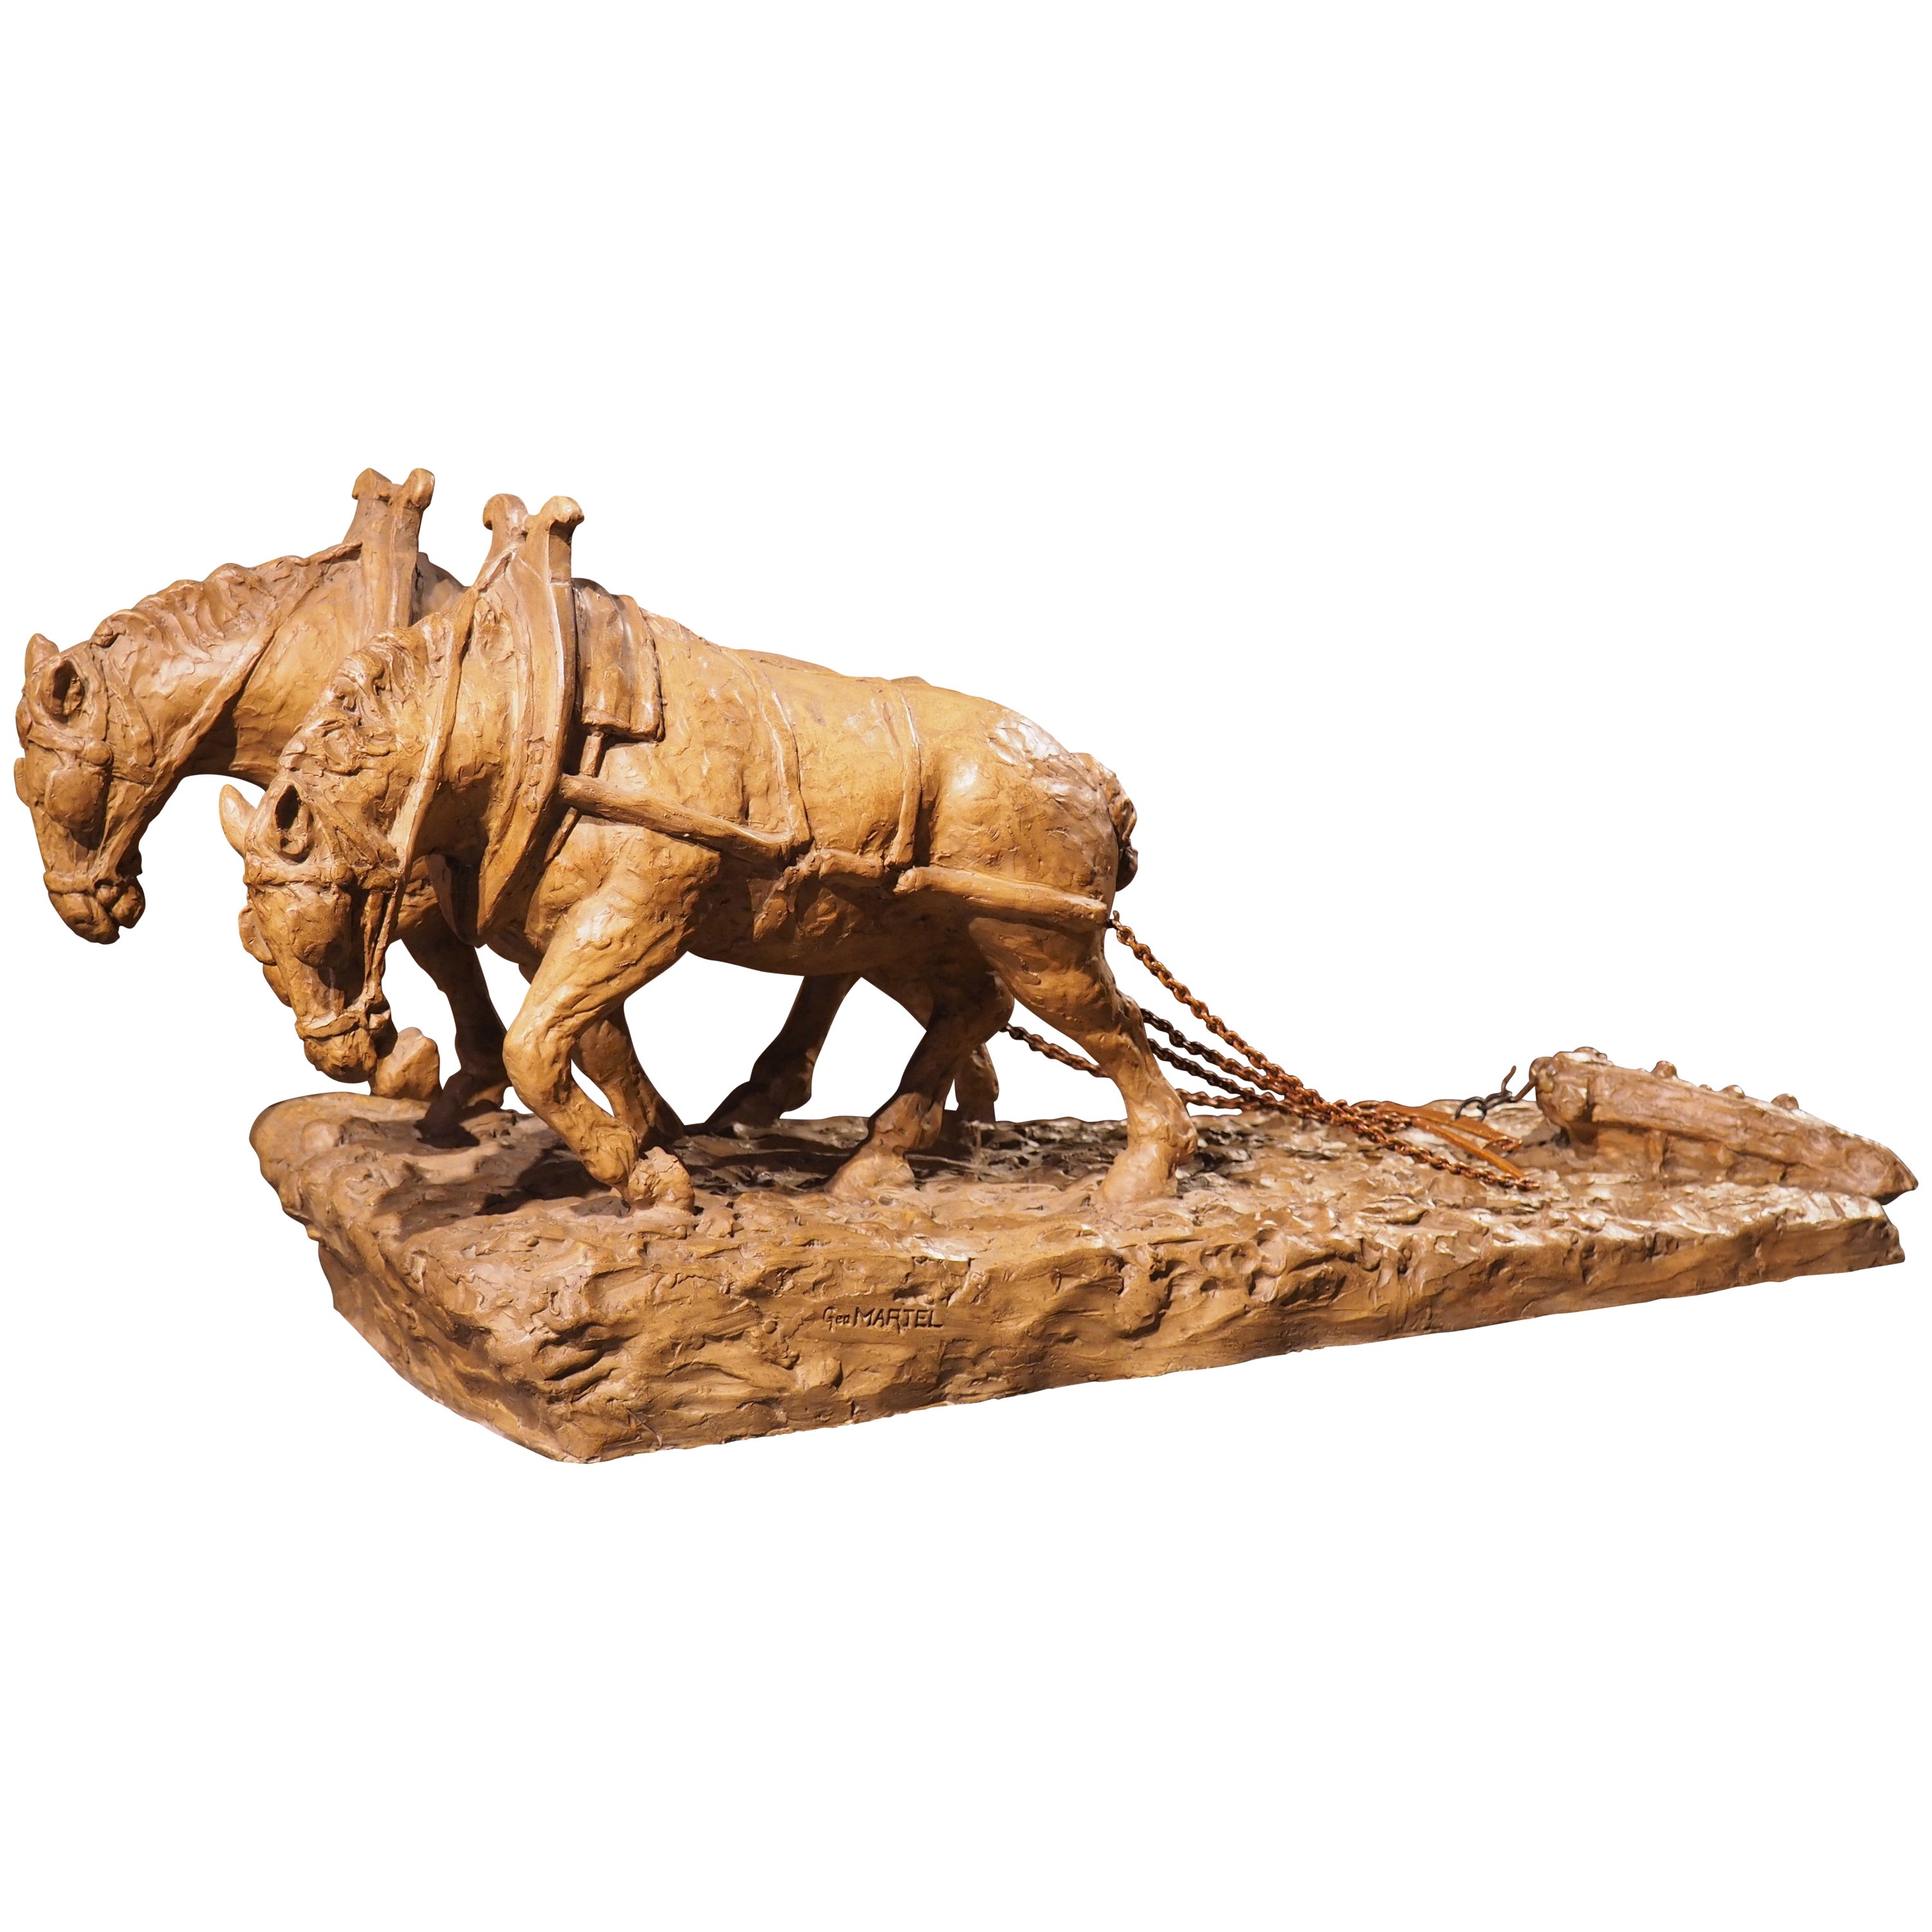 Early 1900s Terra Cotta Plow Horses Sculpture from France